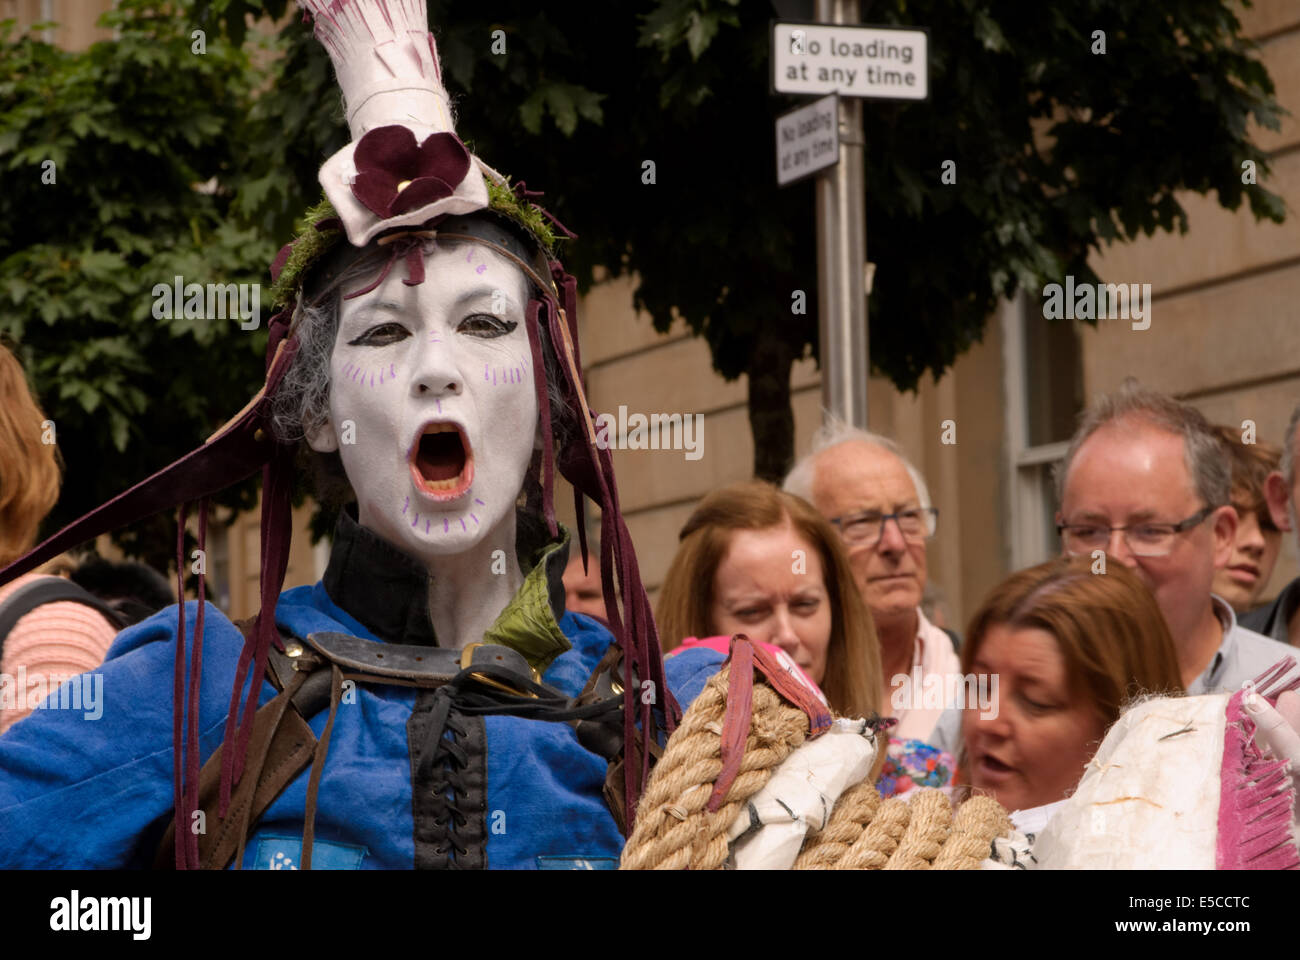 Theatrical performance at the Merchant city festival in Glasgow on 27 July 2014 taking place during the Commonwealth Games Stock Photo